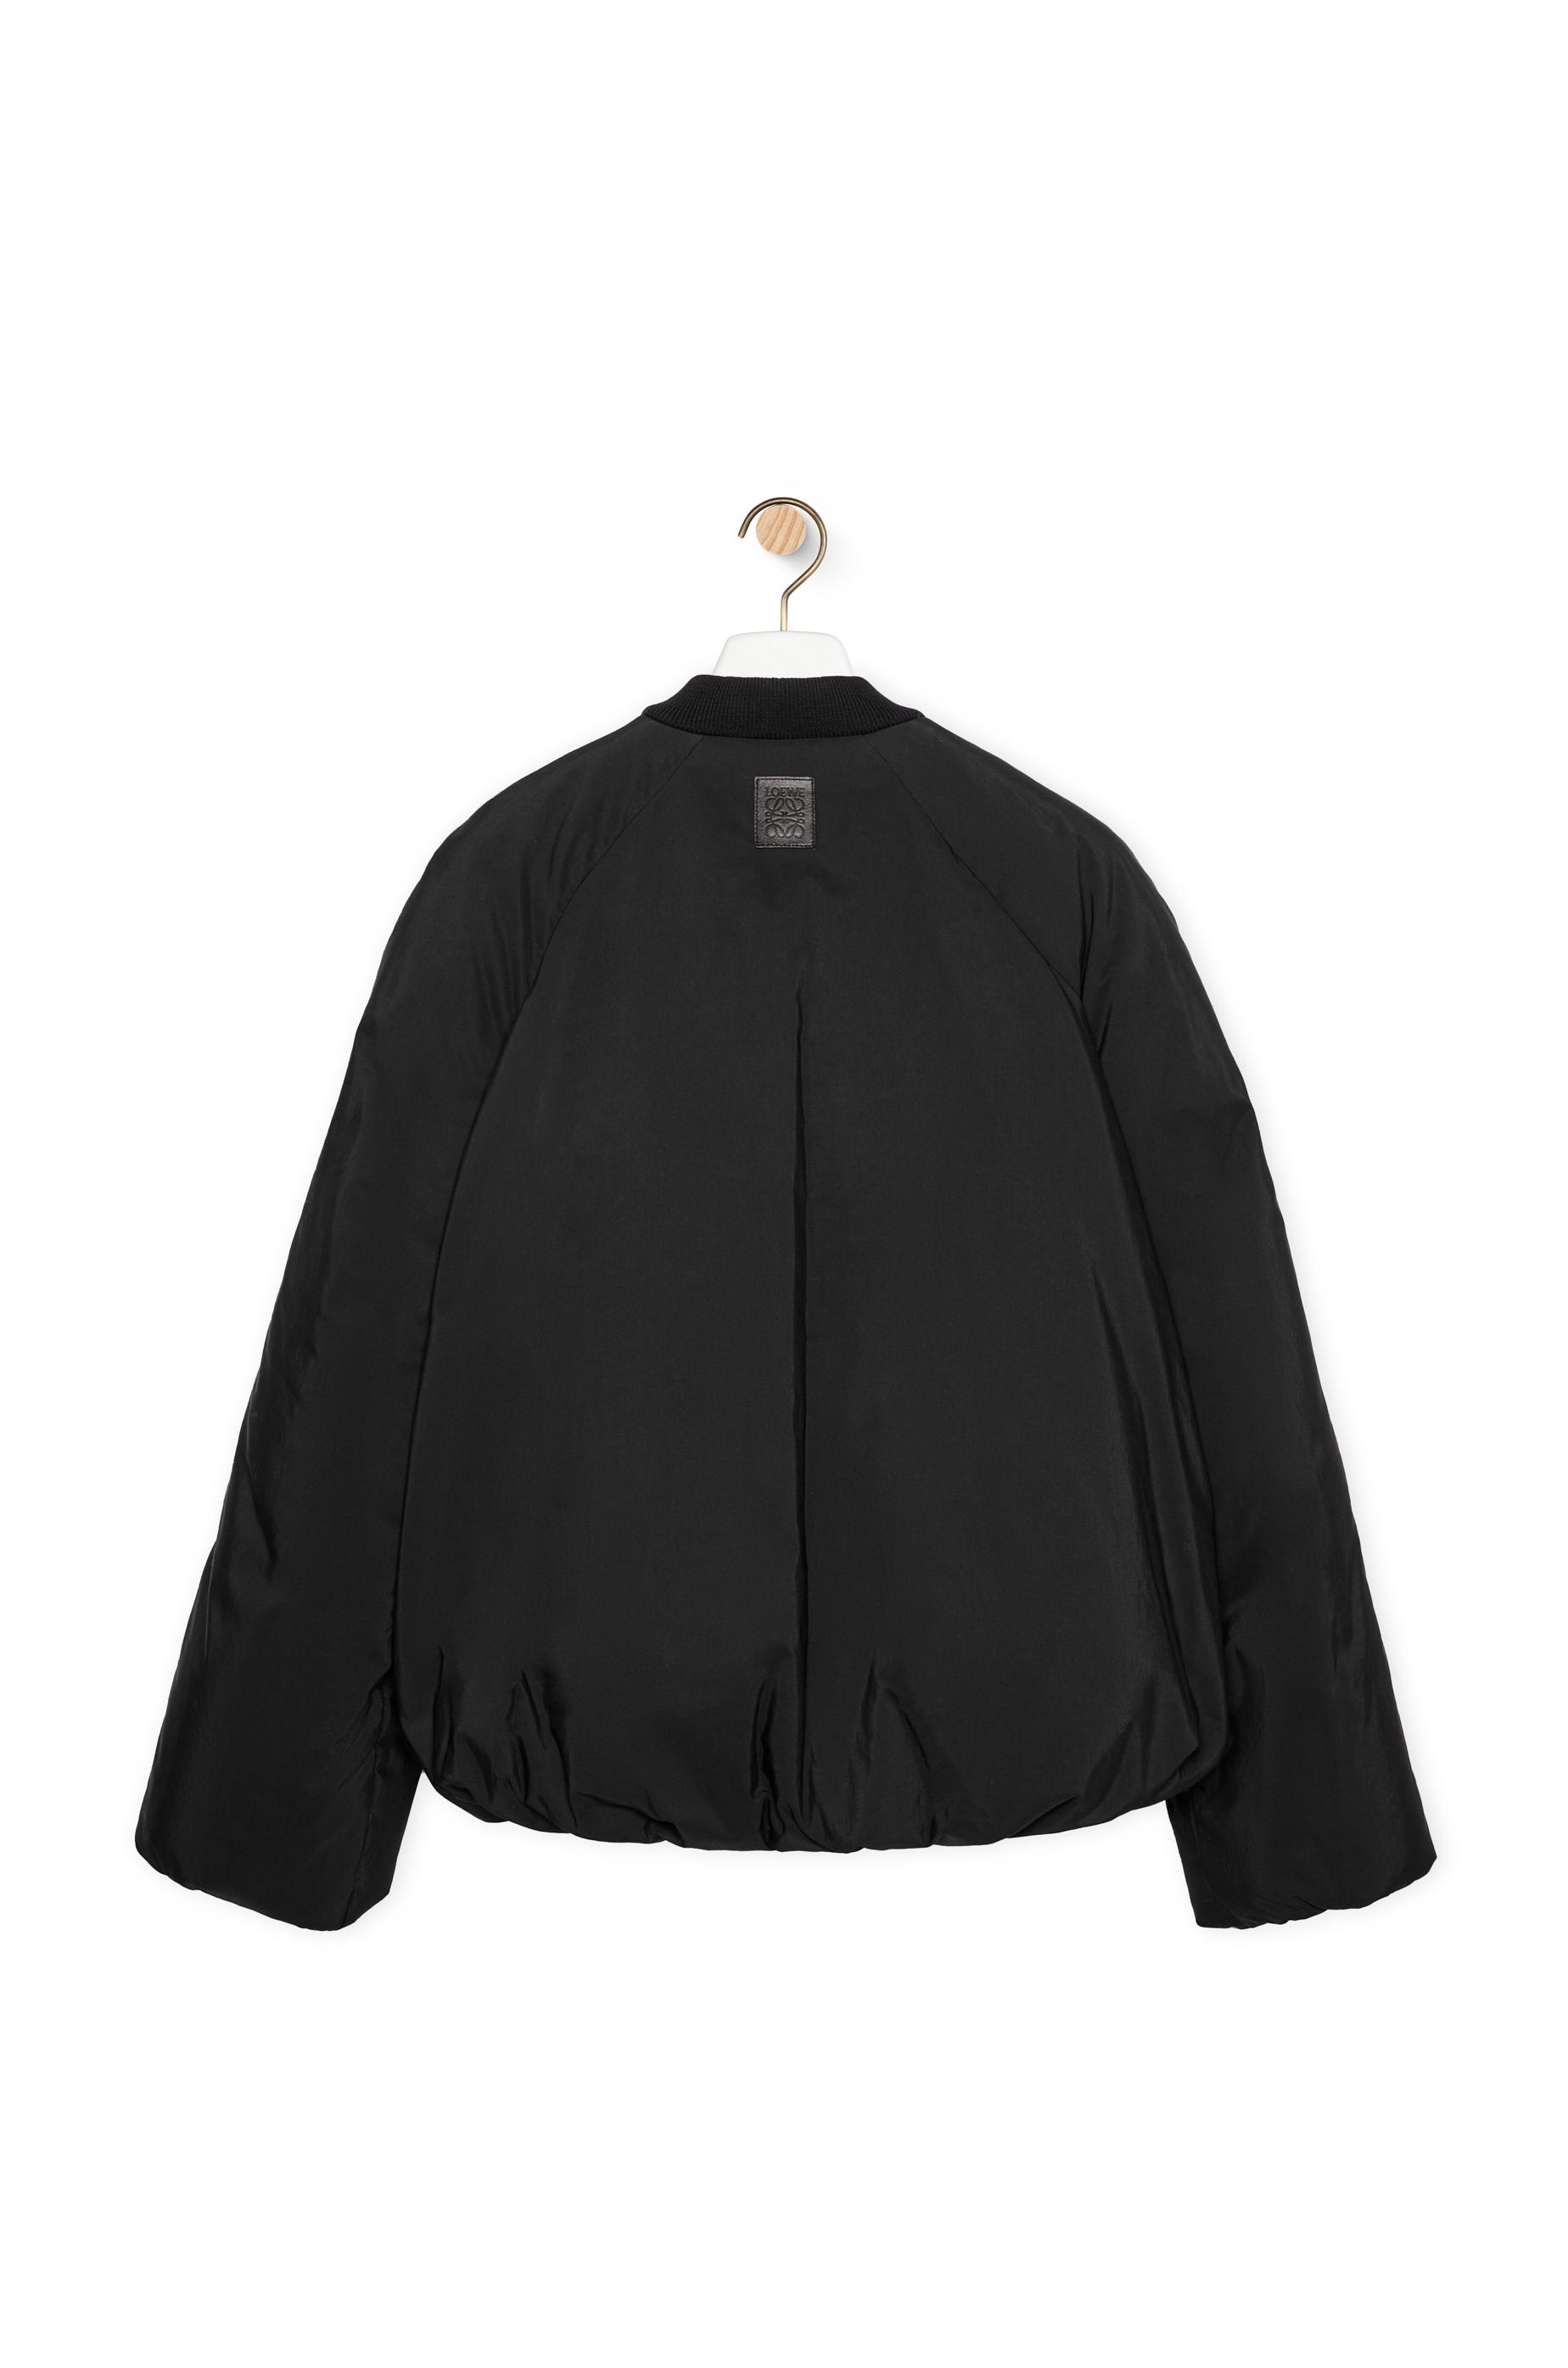 Loewe Padded Bomber Jacket In Technical Cotton in Black for Men | Lyst